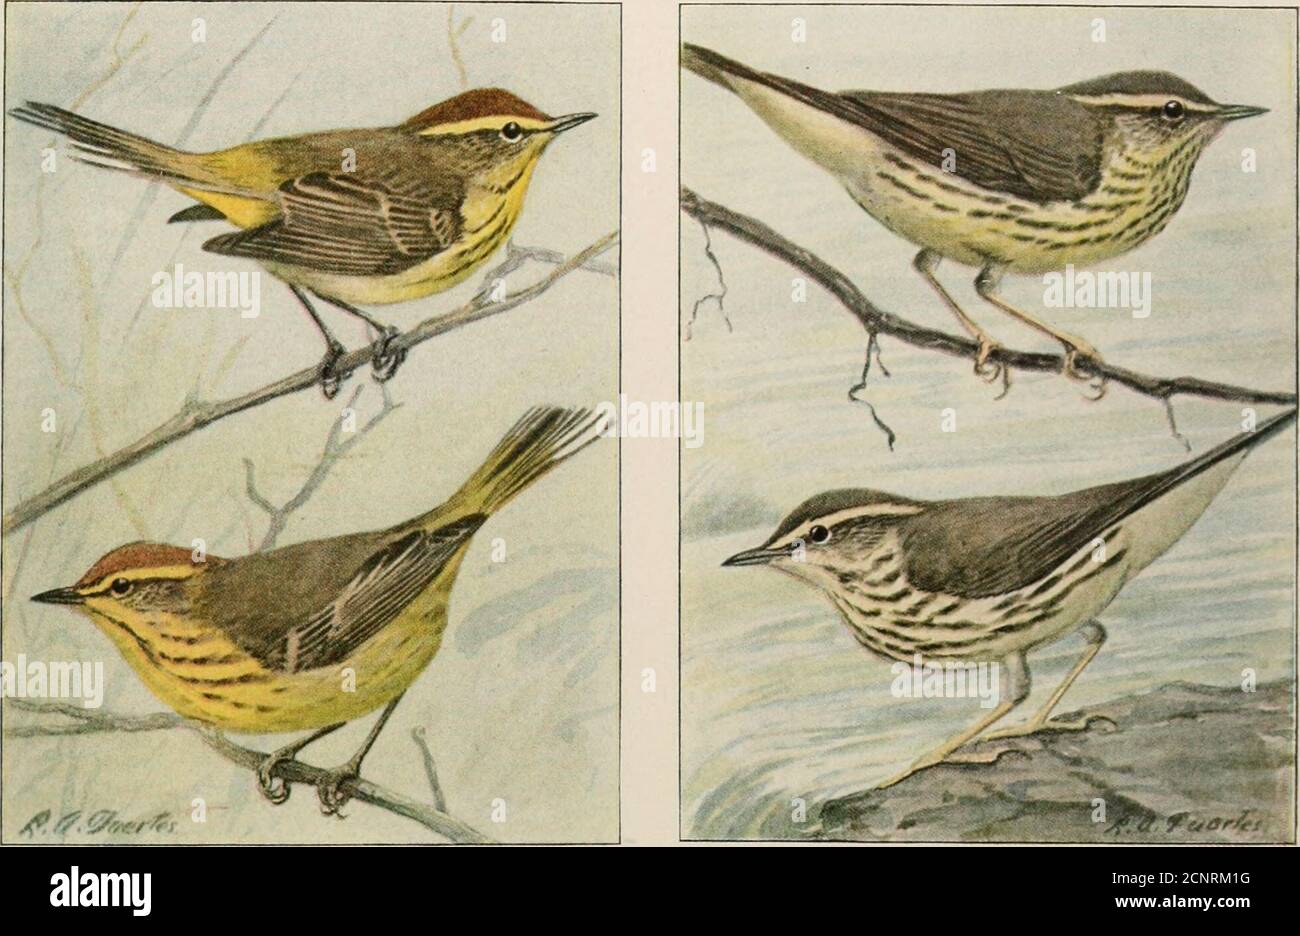 . The book of birds; common birds of town and country and American game birds . BAY-BREASTED WARBLER Male and Female BLACK-THROATED GREEN WARBLERMale and Female BLACK-THROATED GRAY WARBLER PINE WARBLER 92. Stock Photo